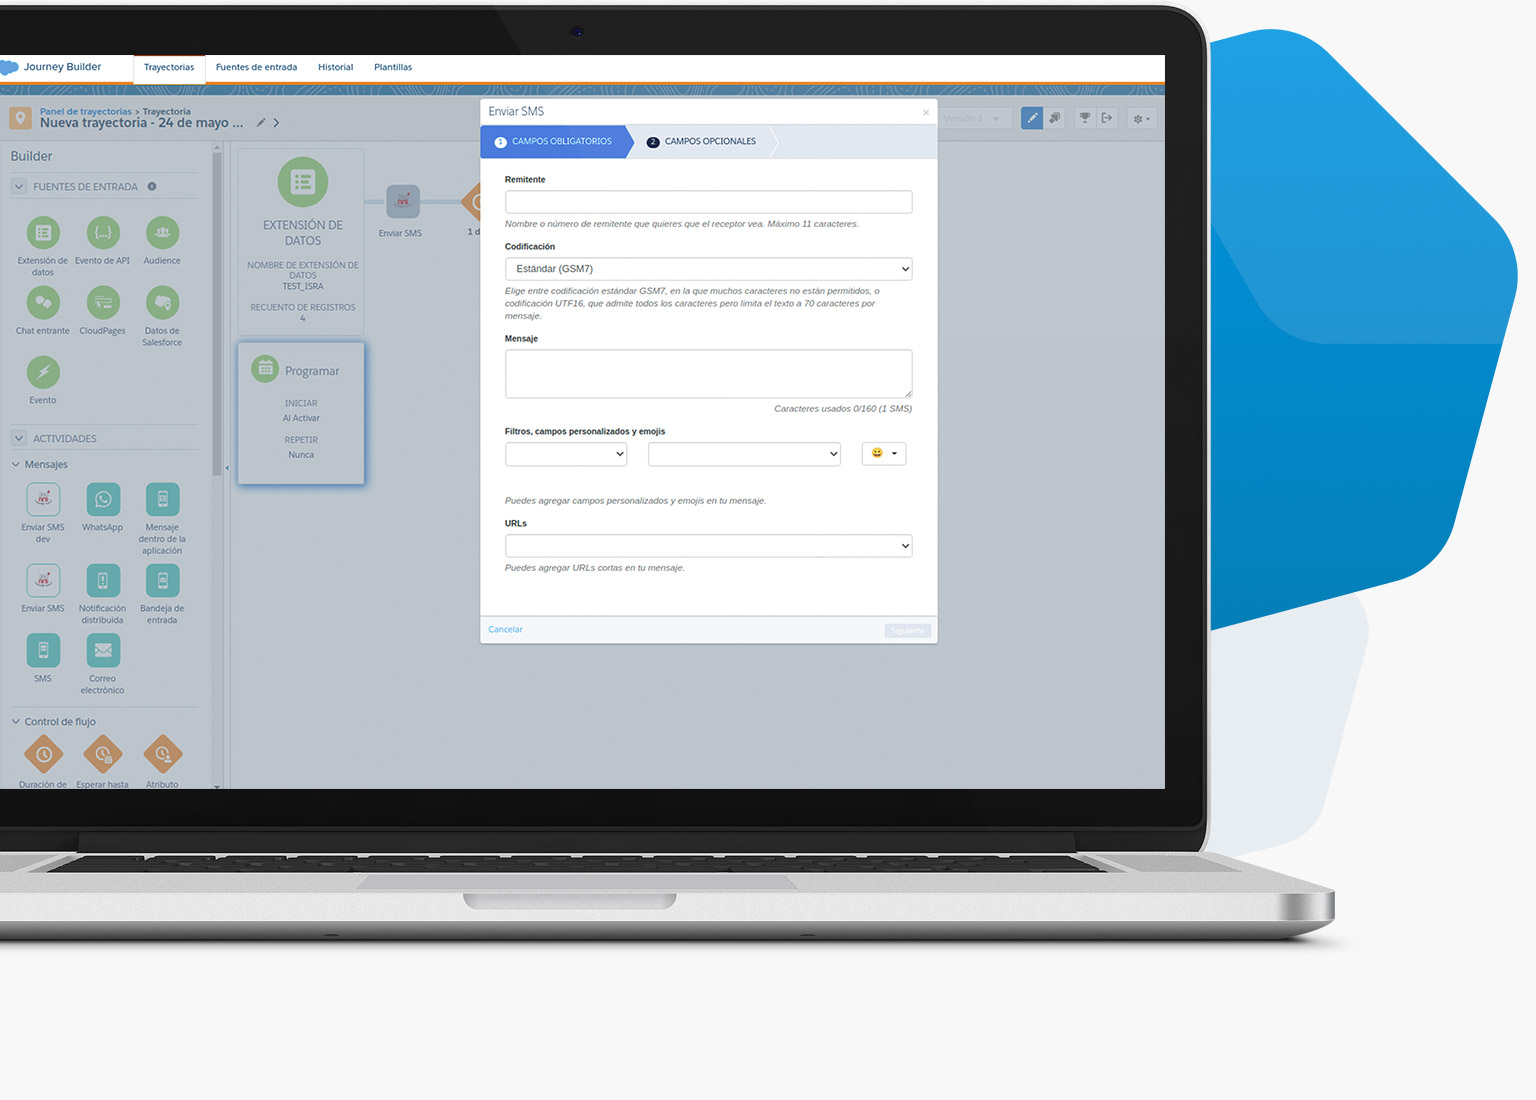 SMS integration with Salesforce